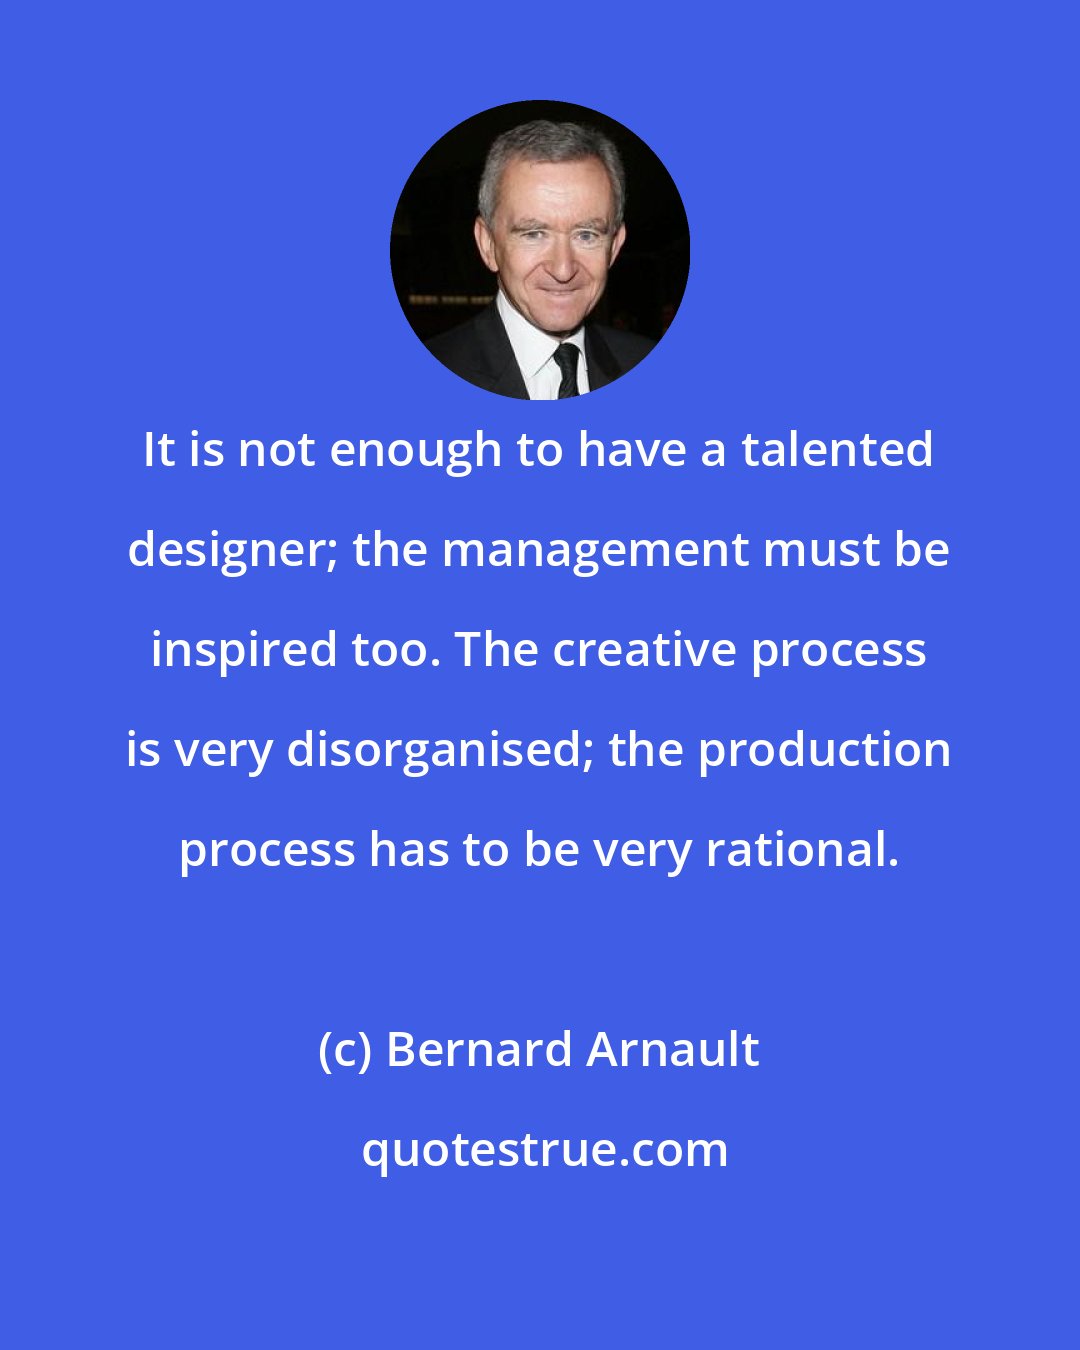 Bernard Arnault: It is not enough to have a talented designer; the management must be inspired too. The creative process is very disorganised; the production process has to be very rational.